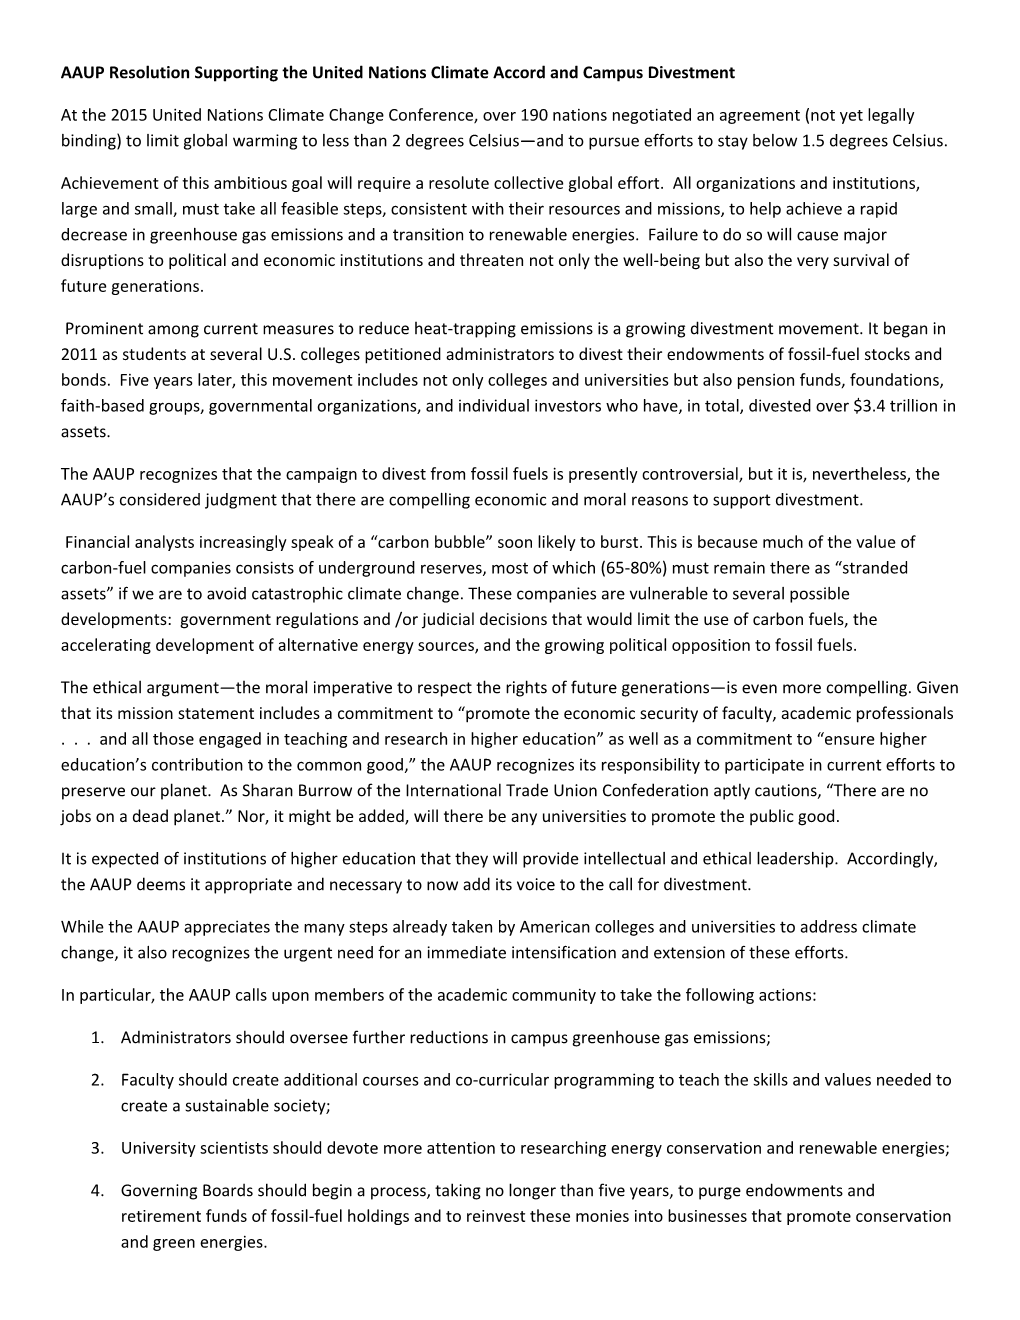 AAUP Resolution Supporting the United Nations Climate Accord and Campus Divestment